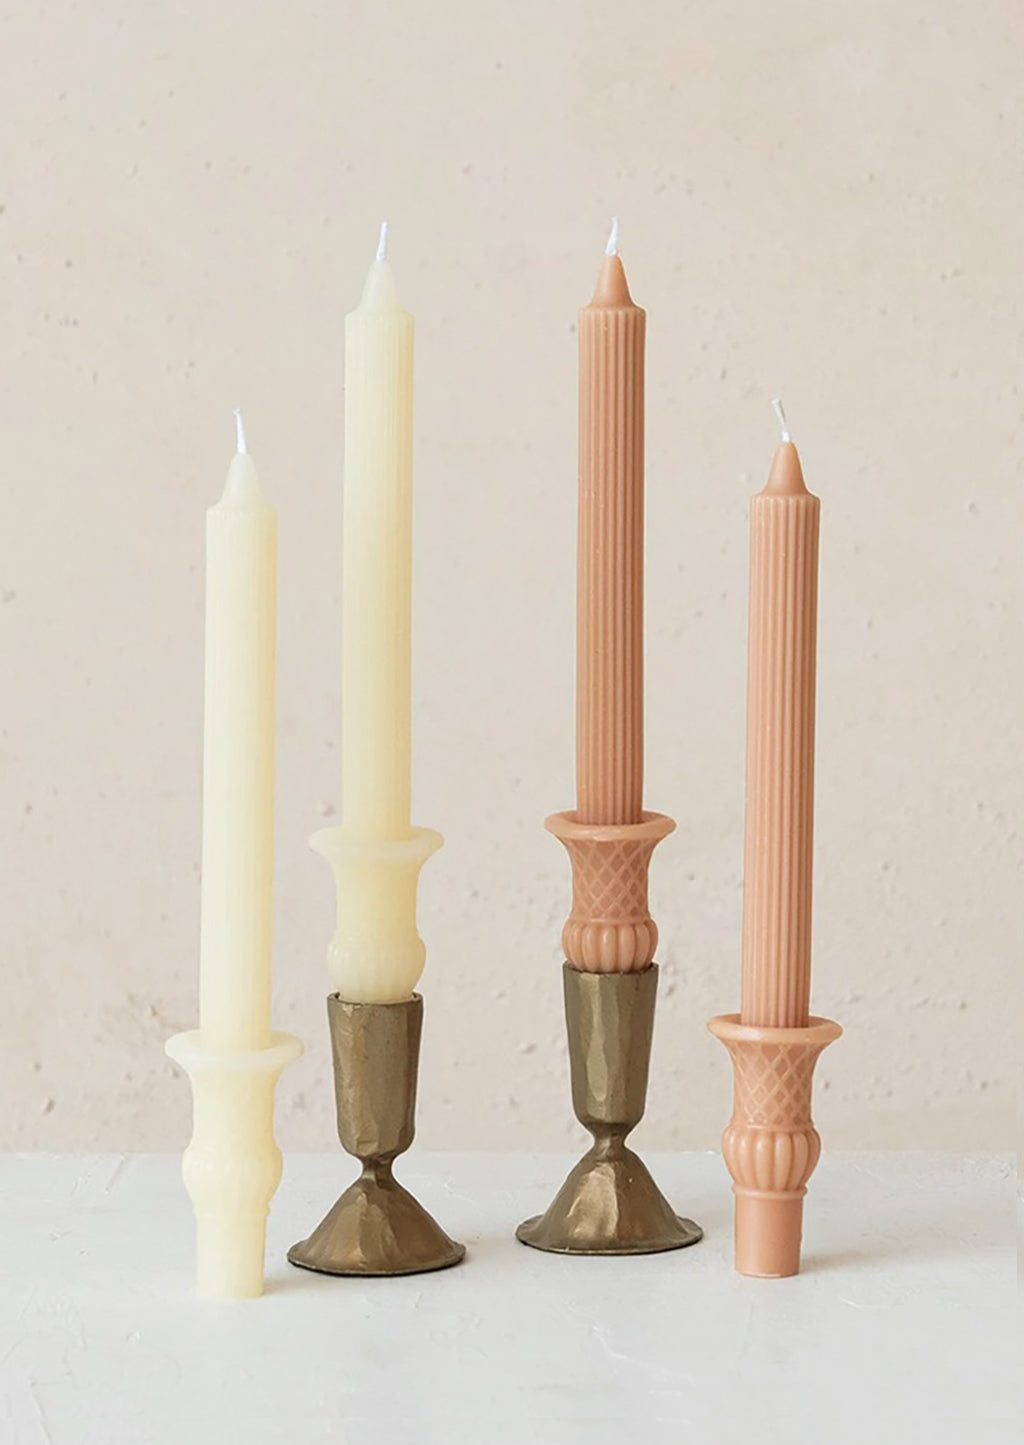 Ivory: Urn shaped taper candles in ivory and nectar colors.